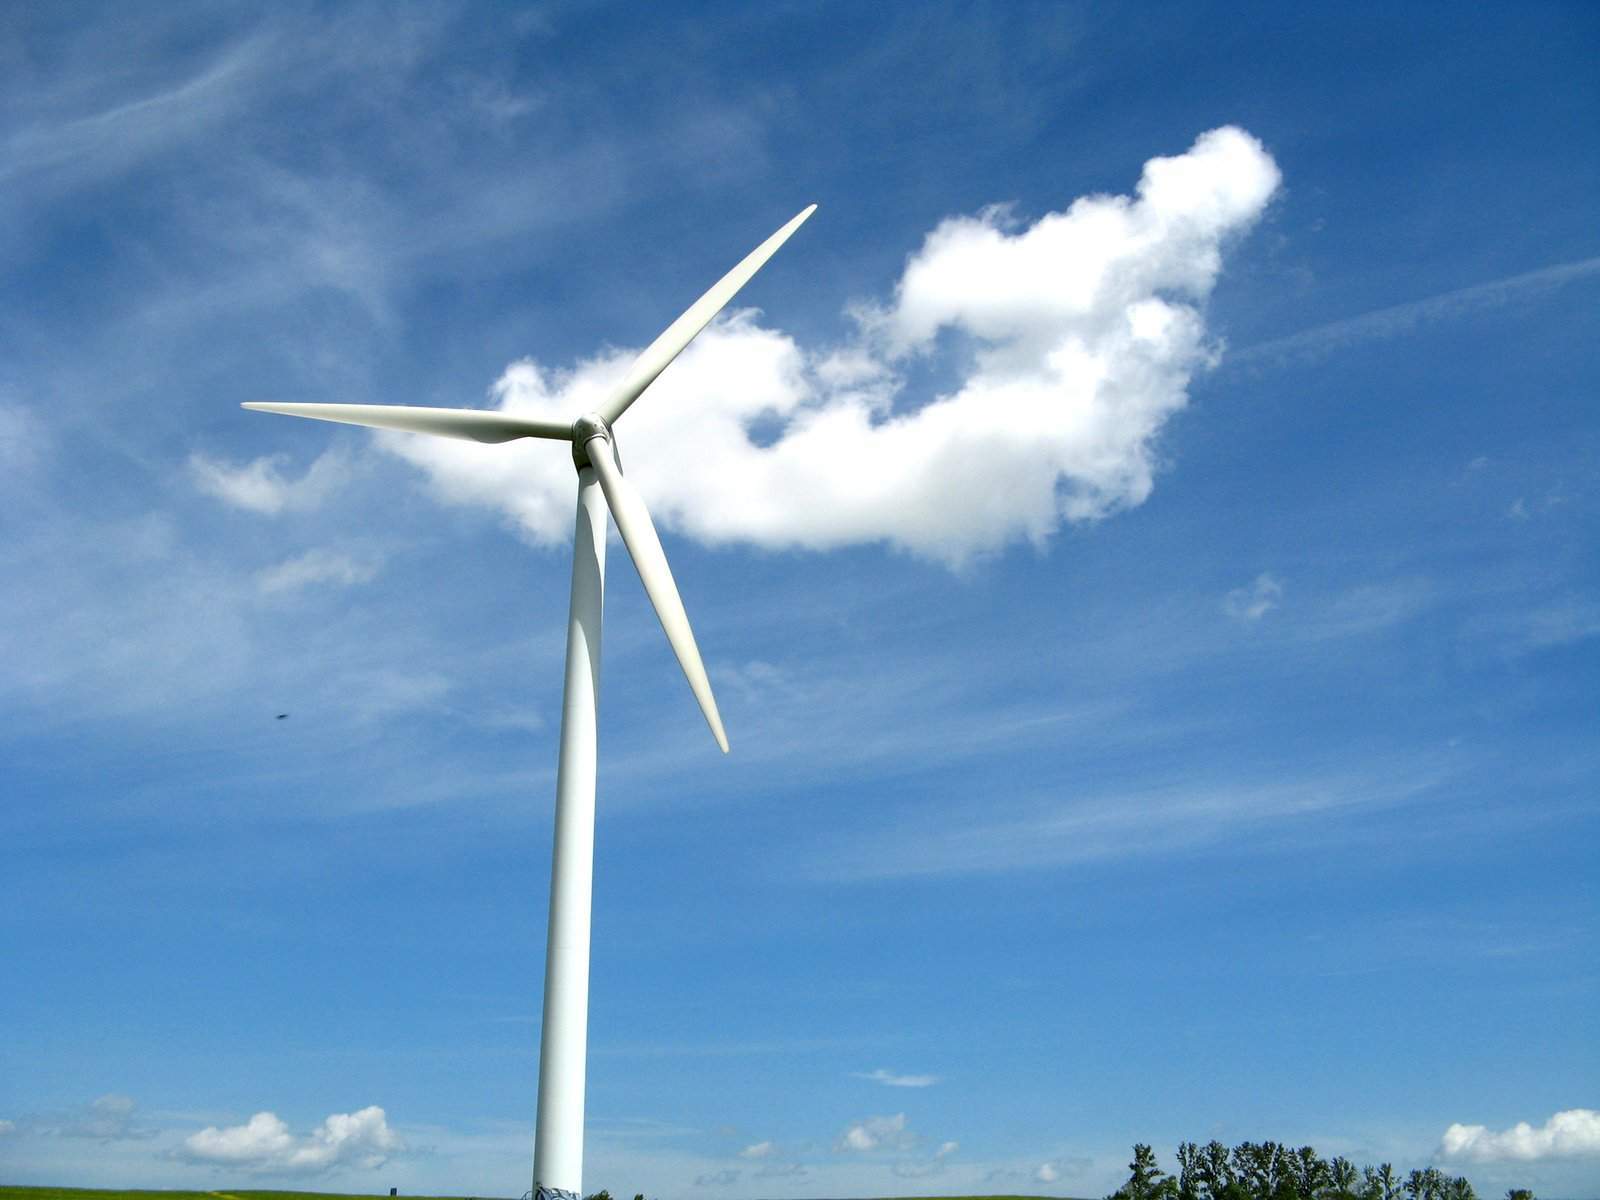 UNSW secures funding for planned wind power test lab in Australia